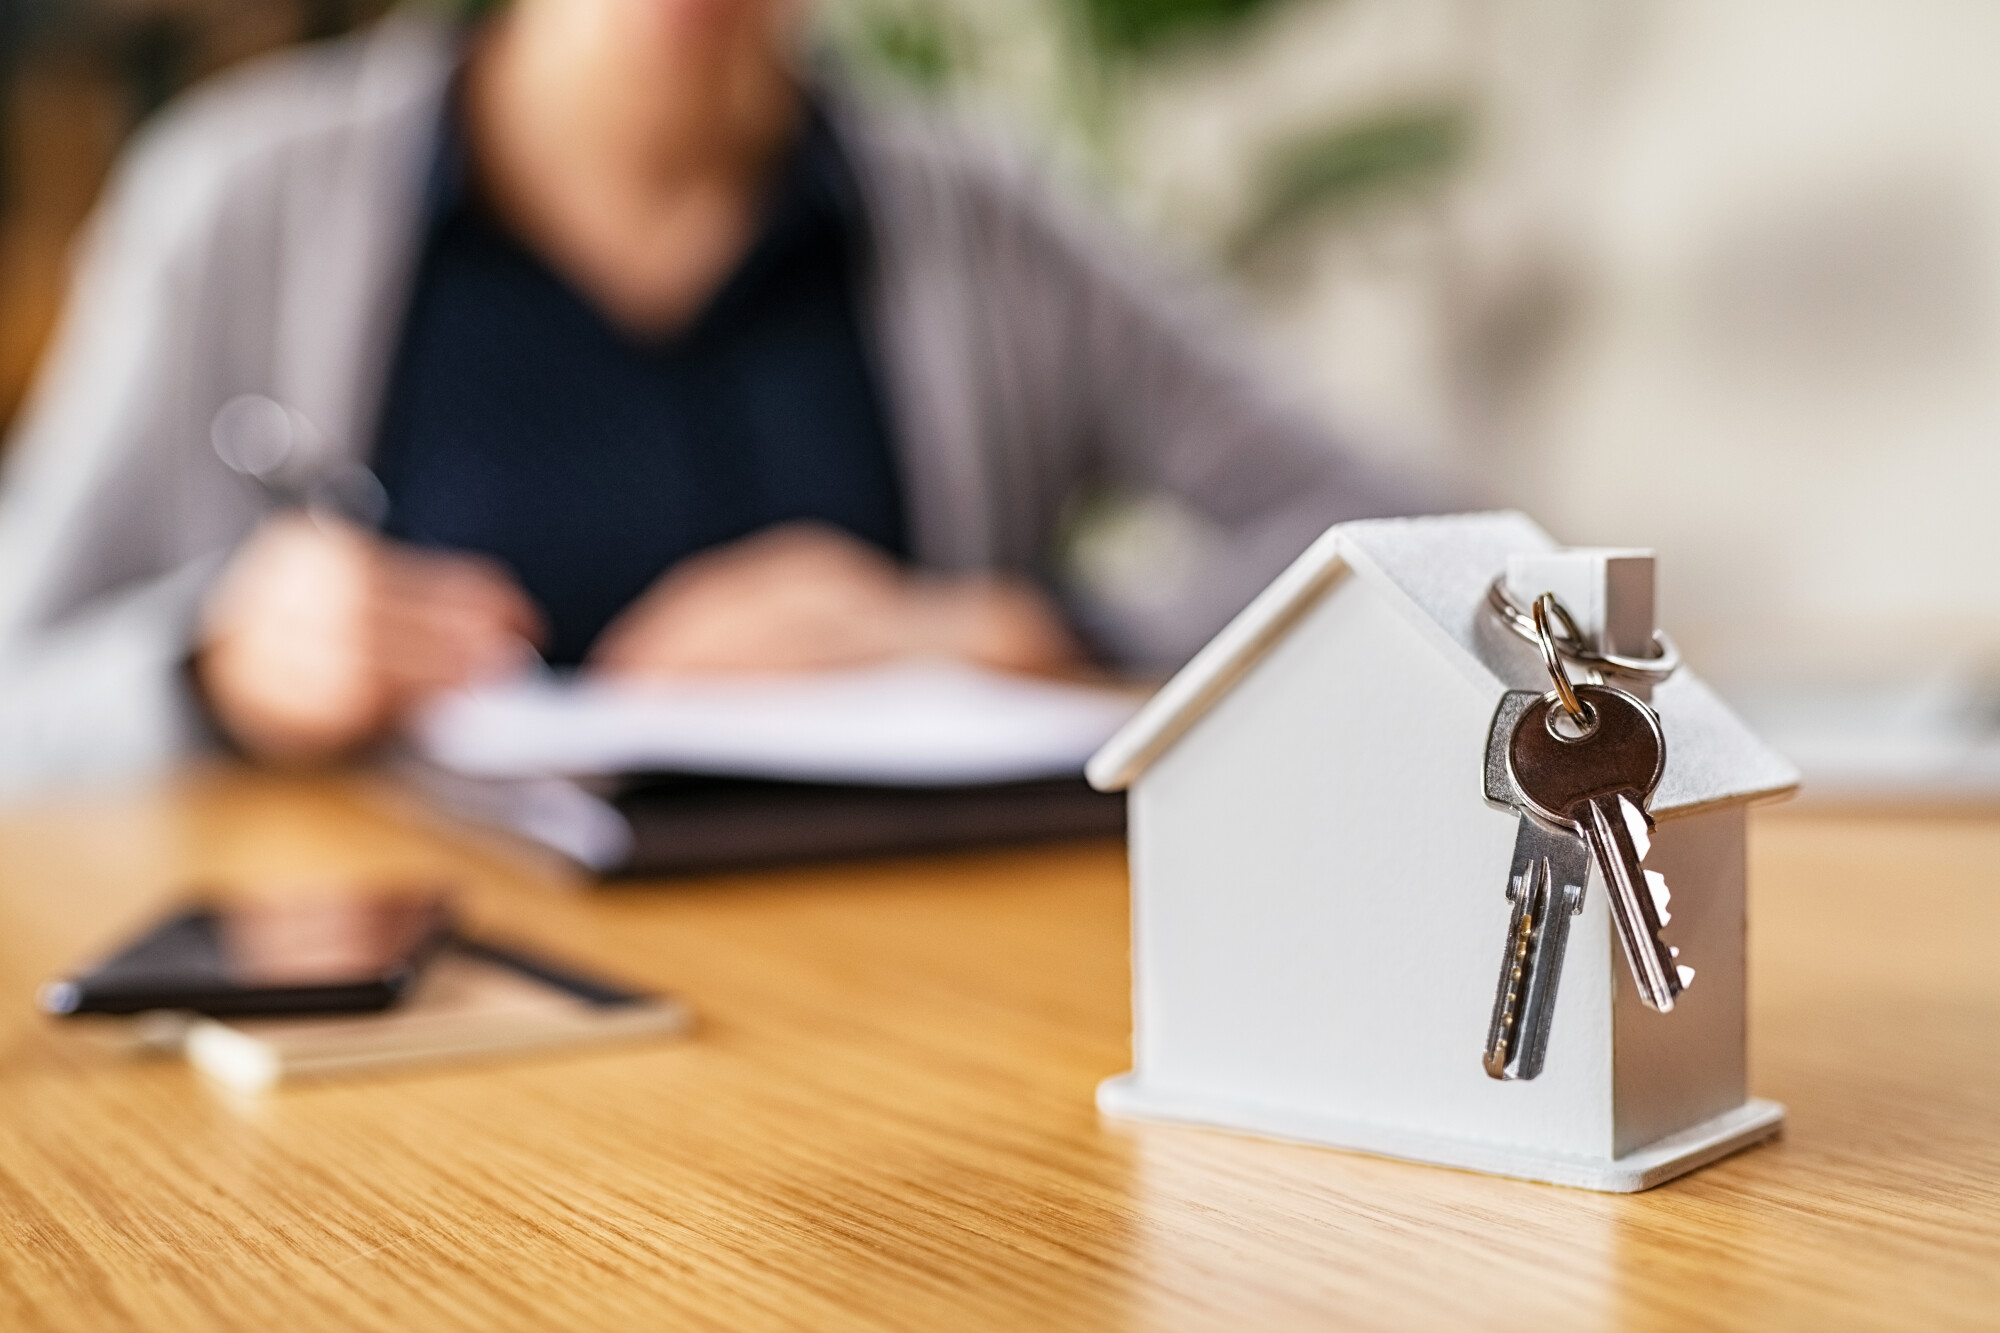 With so much that goes into running a rental if you've decided to take it on yourself, discover how to manage a rental property.